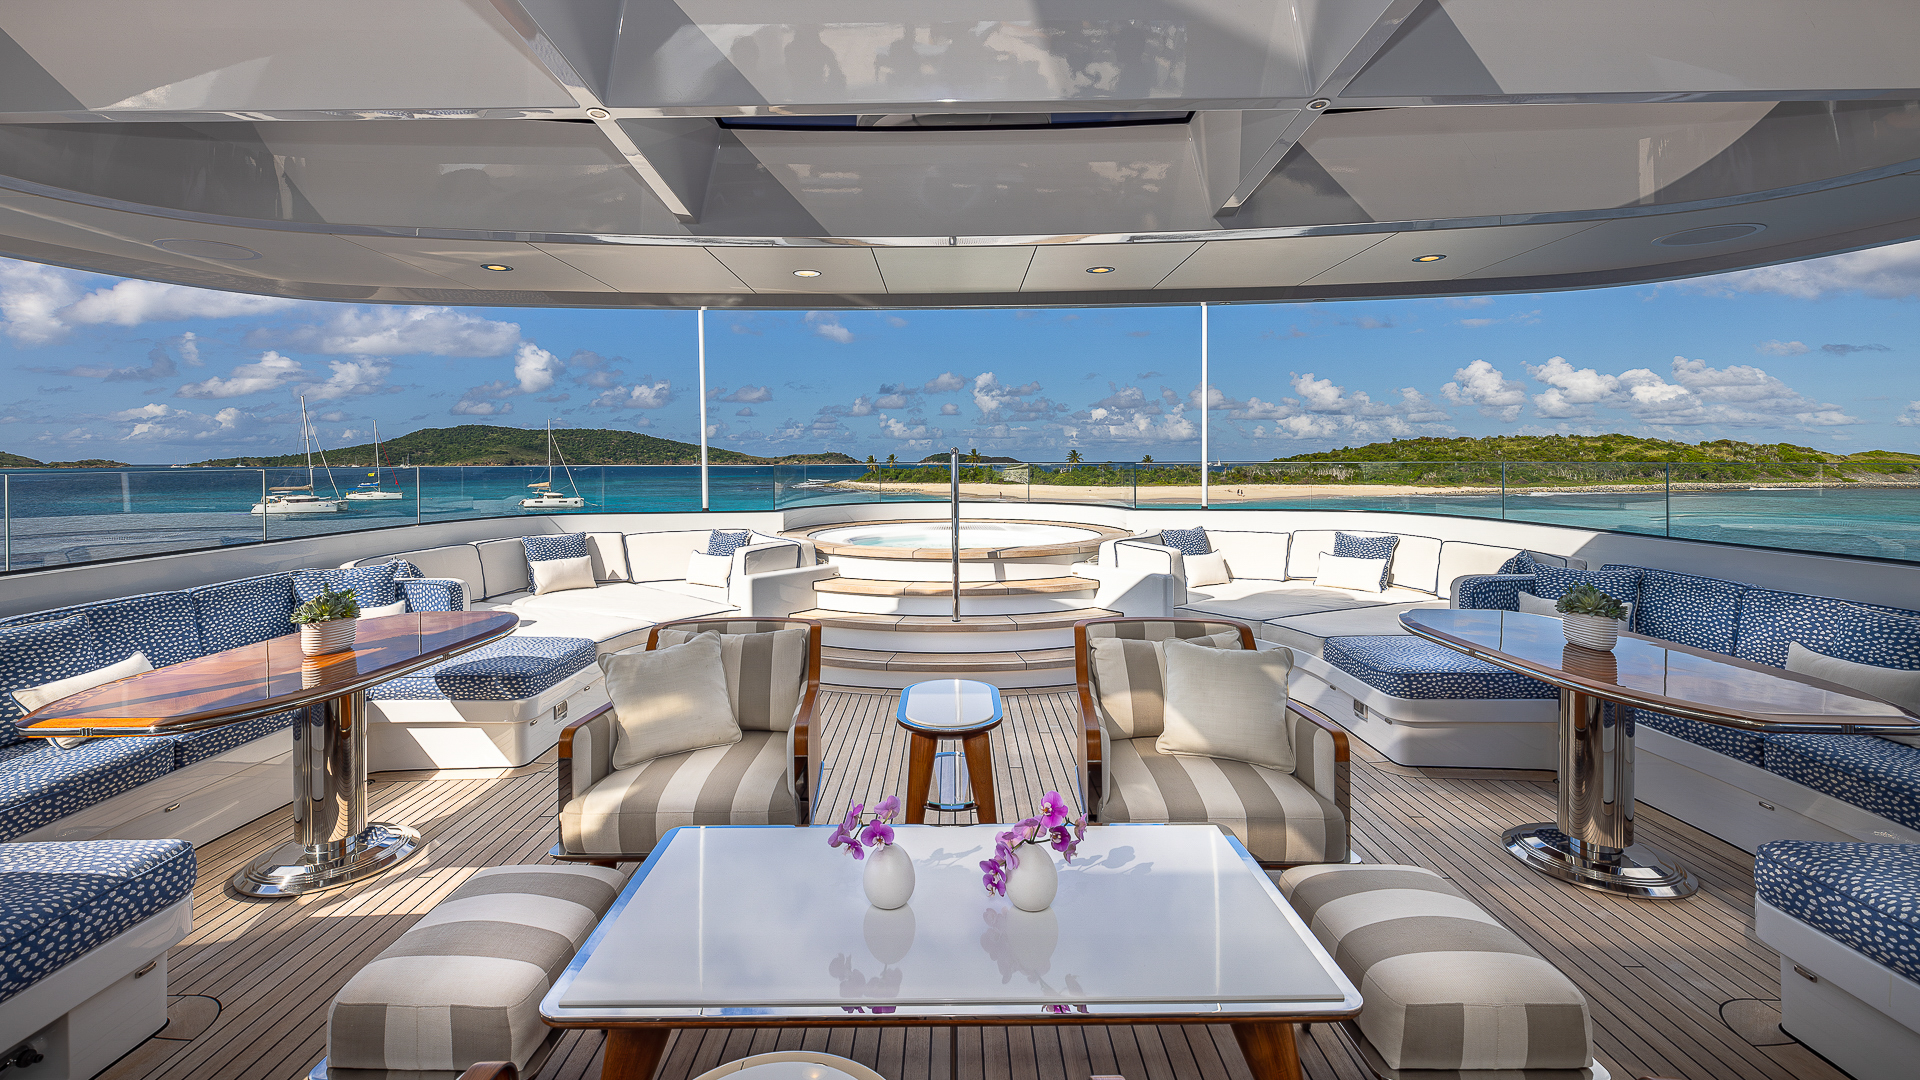 Rock It Sun Deck - With Jacuzzi Looking Forward Credit Yachting Image